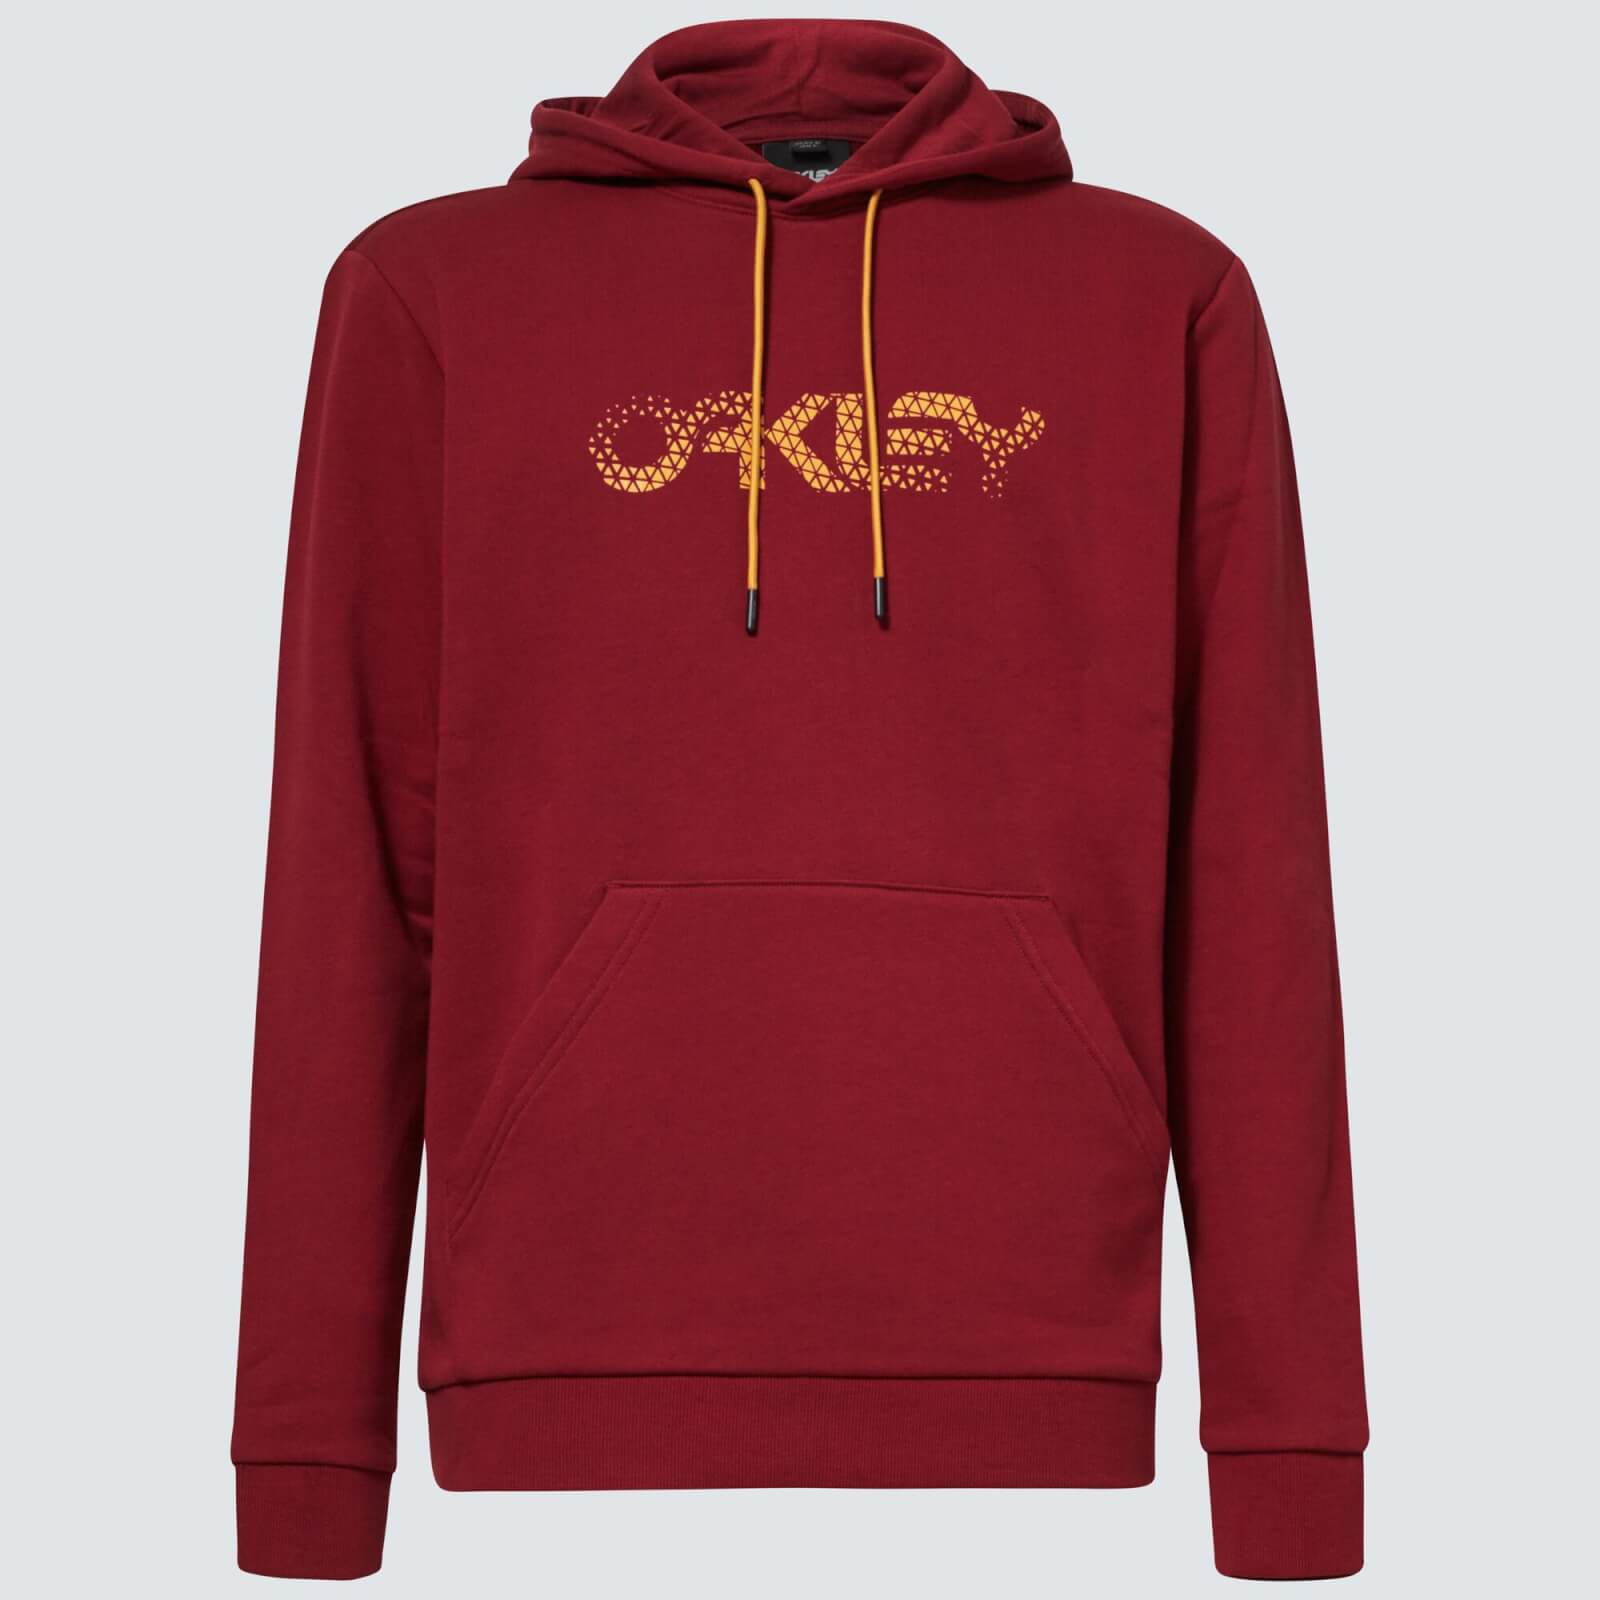 Oakley The Post PO Hoodie – M – Iron red